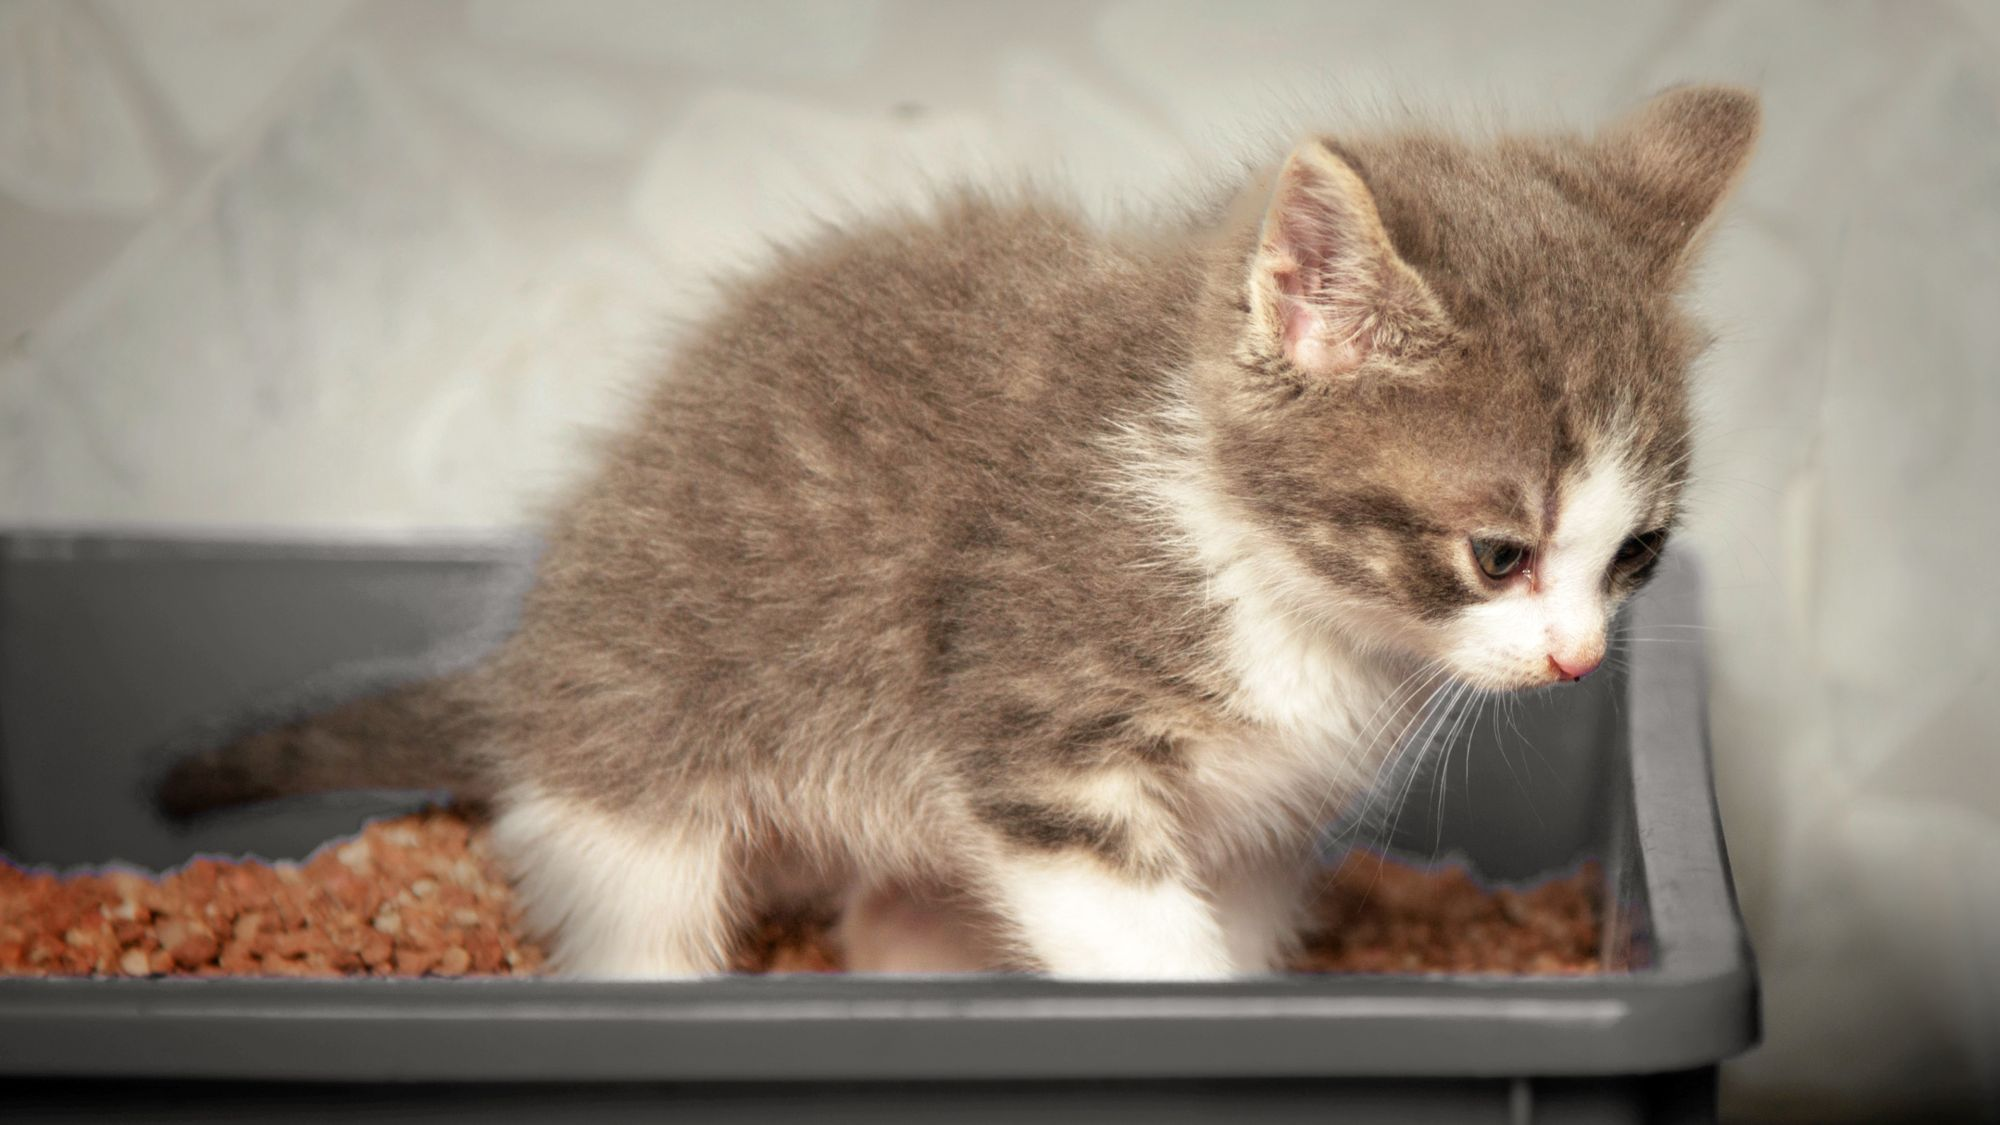 Grey and white kitten standing in a litter tray